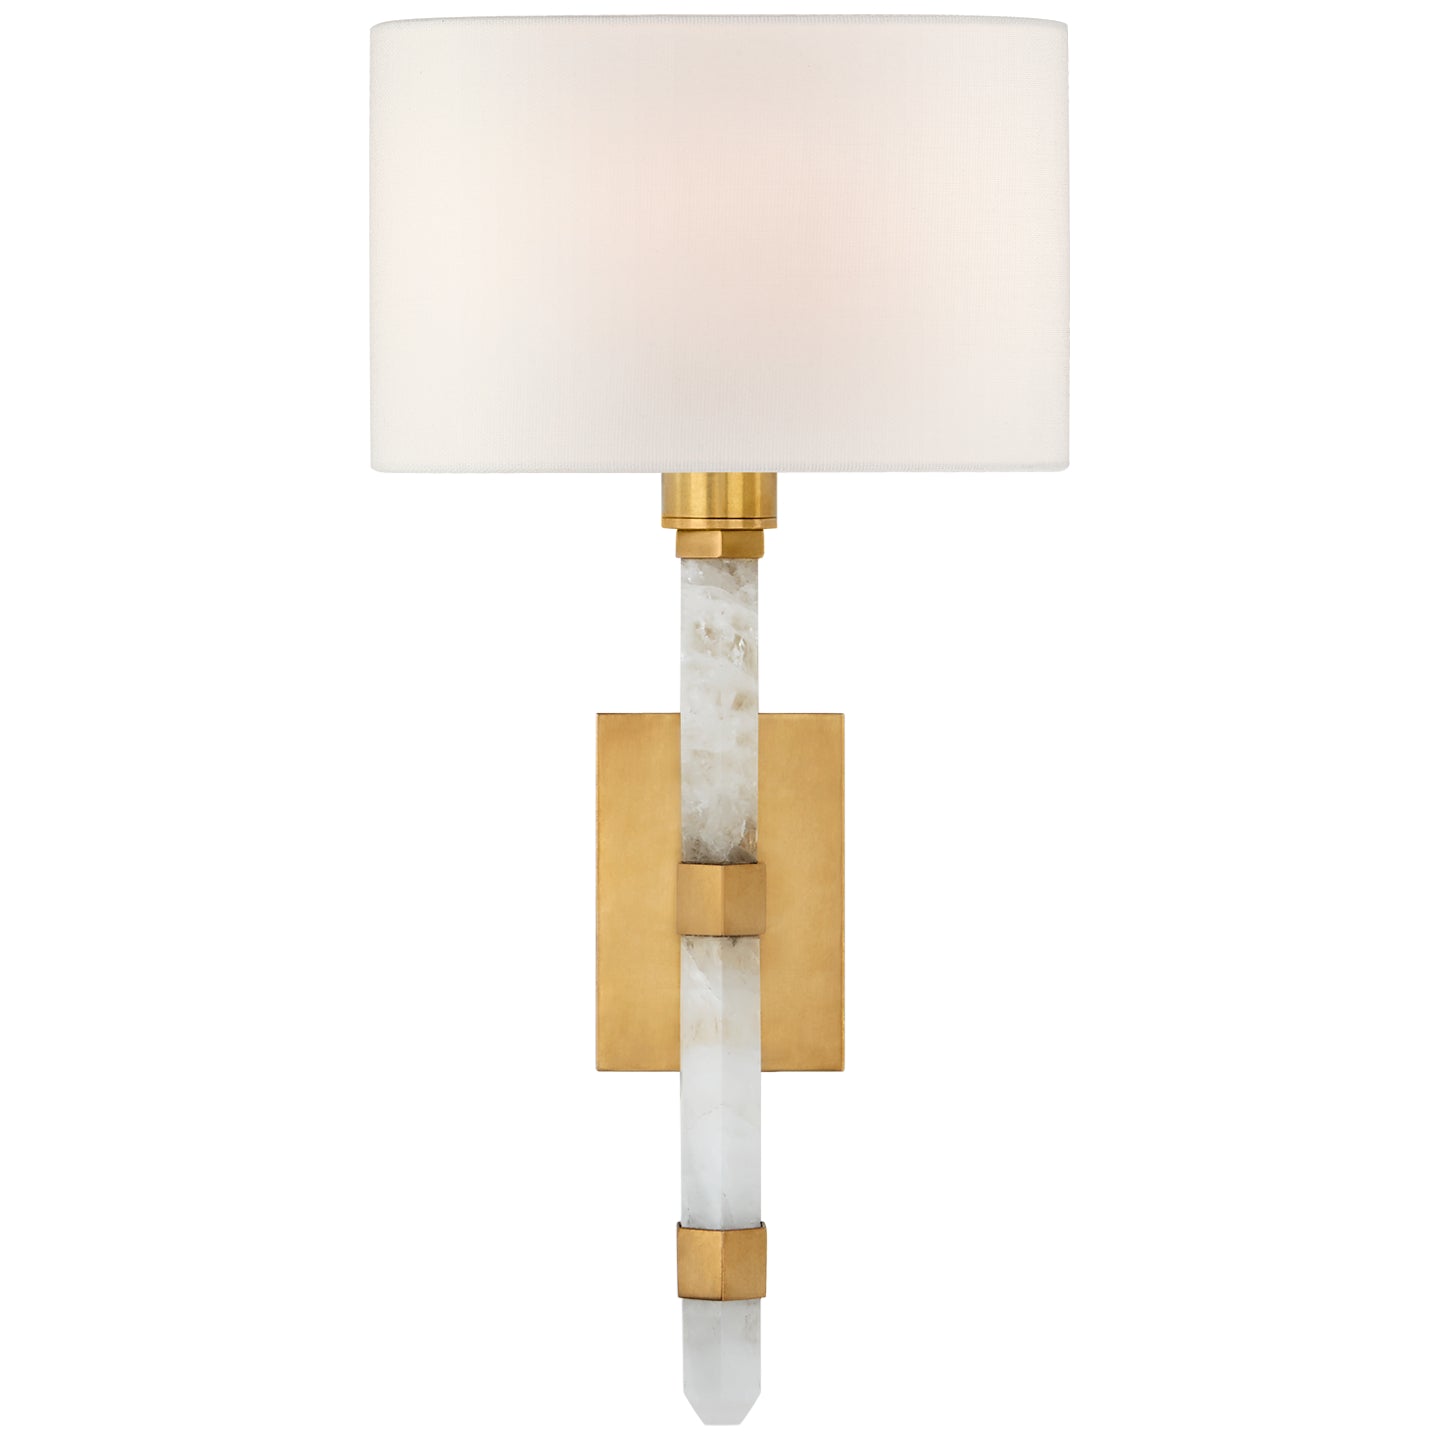 Visual Comfort Signature - SK 2902AB/Q-L - One Light Wall Sconce - Adaline - Antique-Burnished Brass